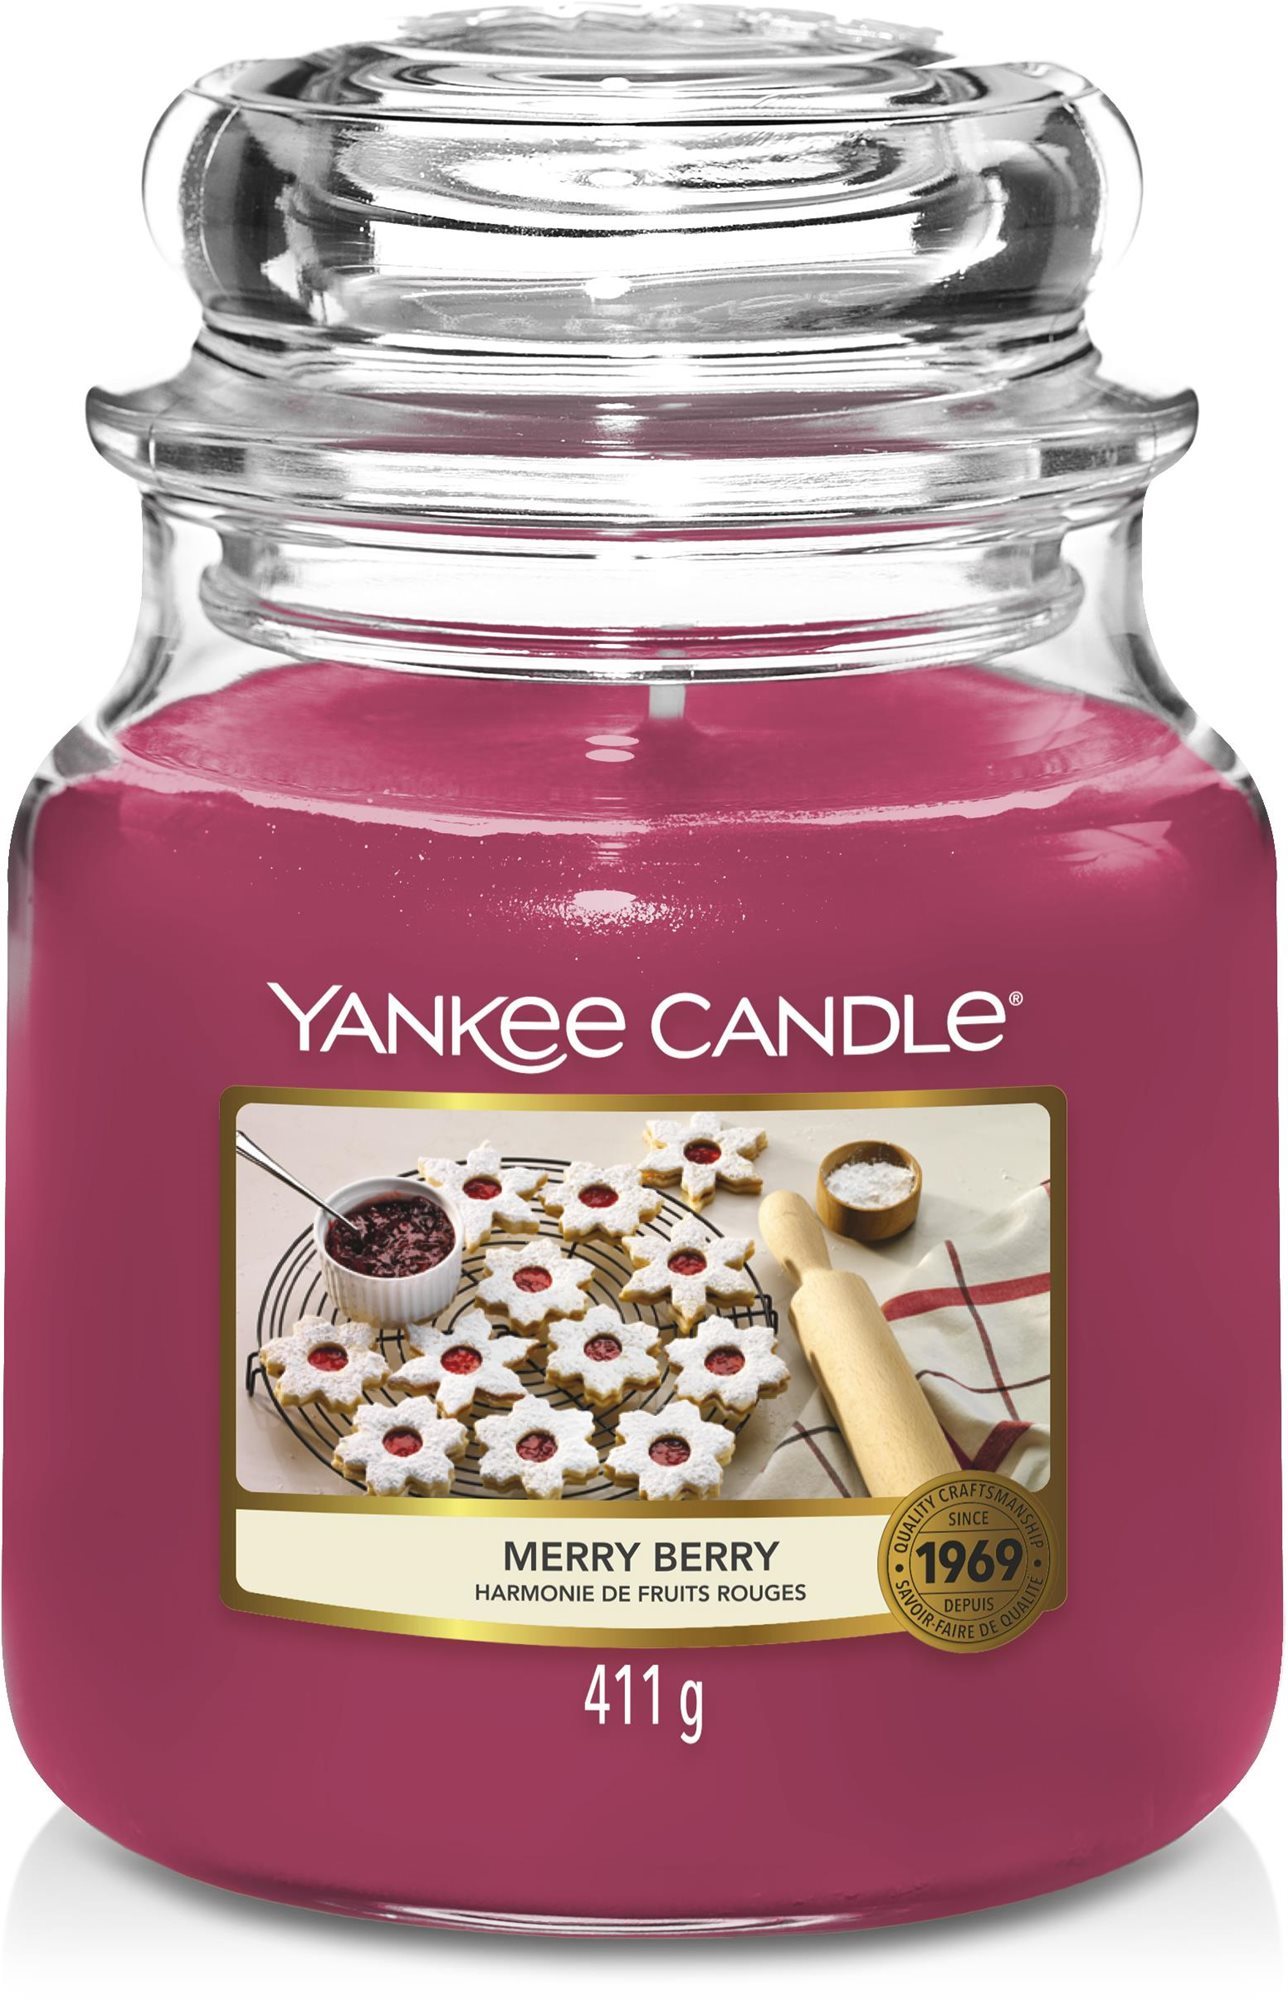 YANKEE CANDLE Merry Berry 411 g